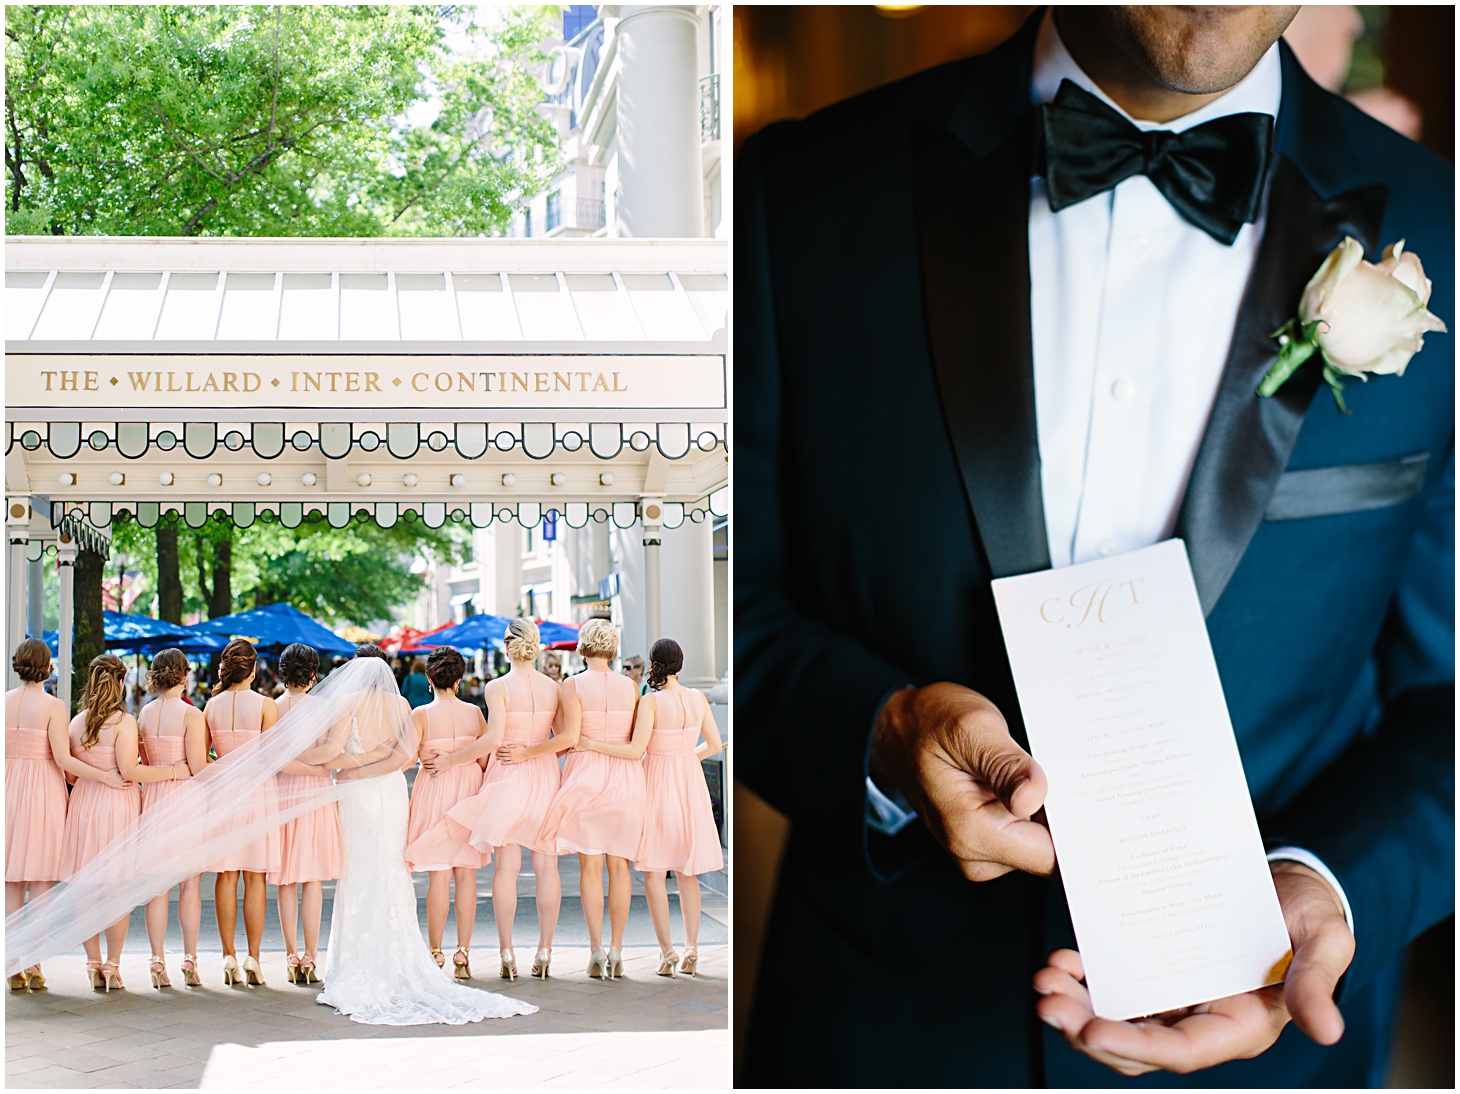 Images Captured By : SARAH BRADSHAW PHOTOGRAPHY